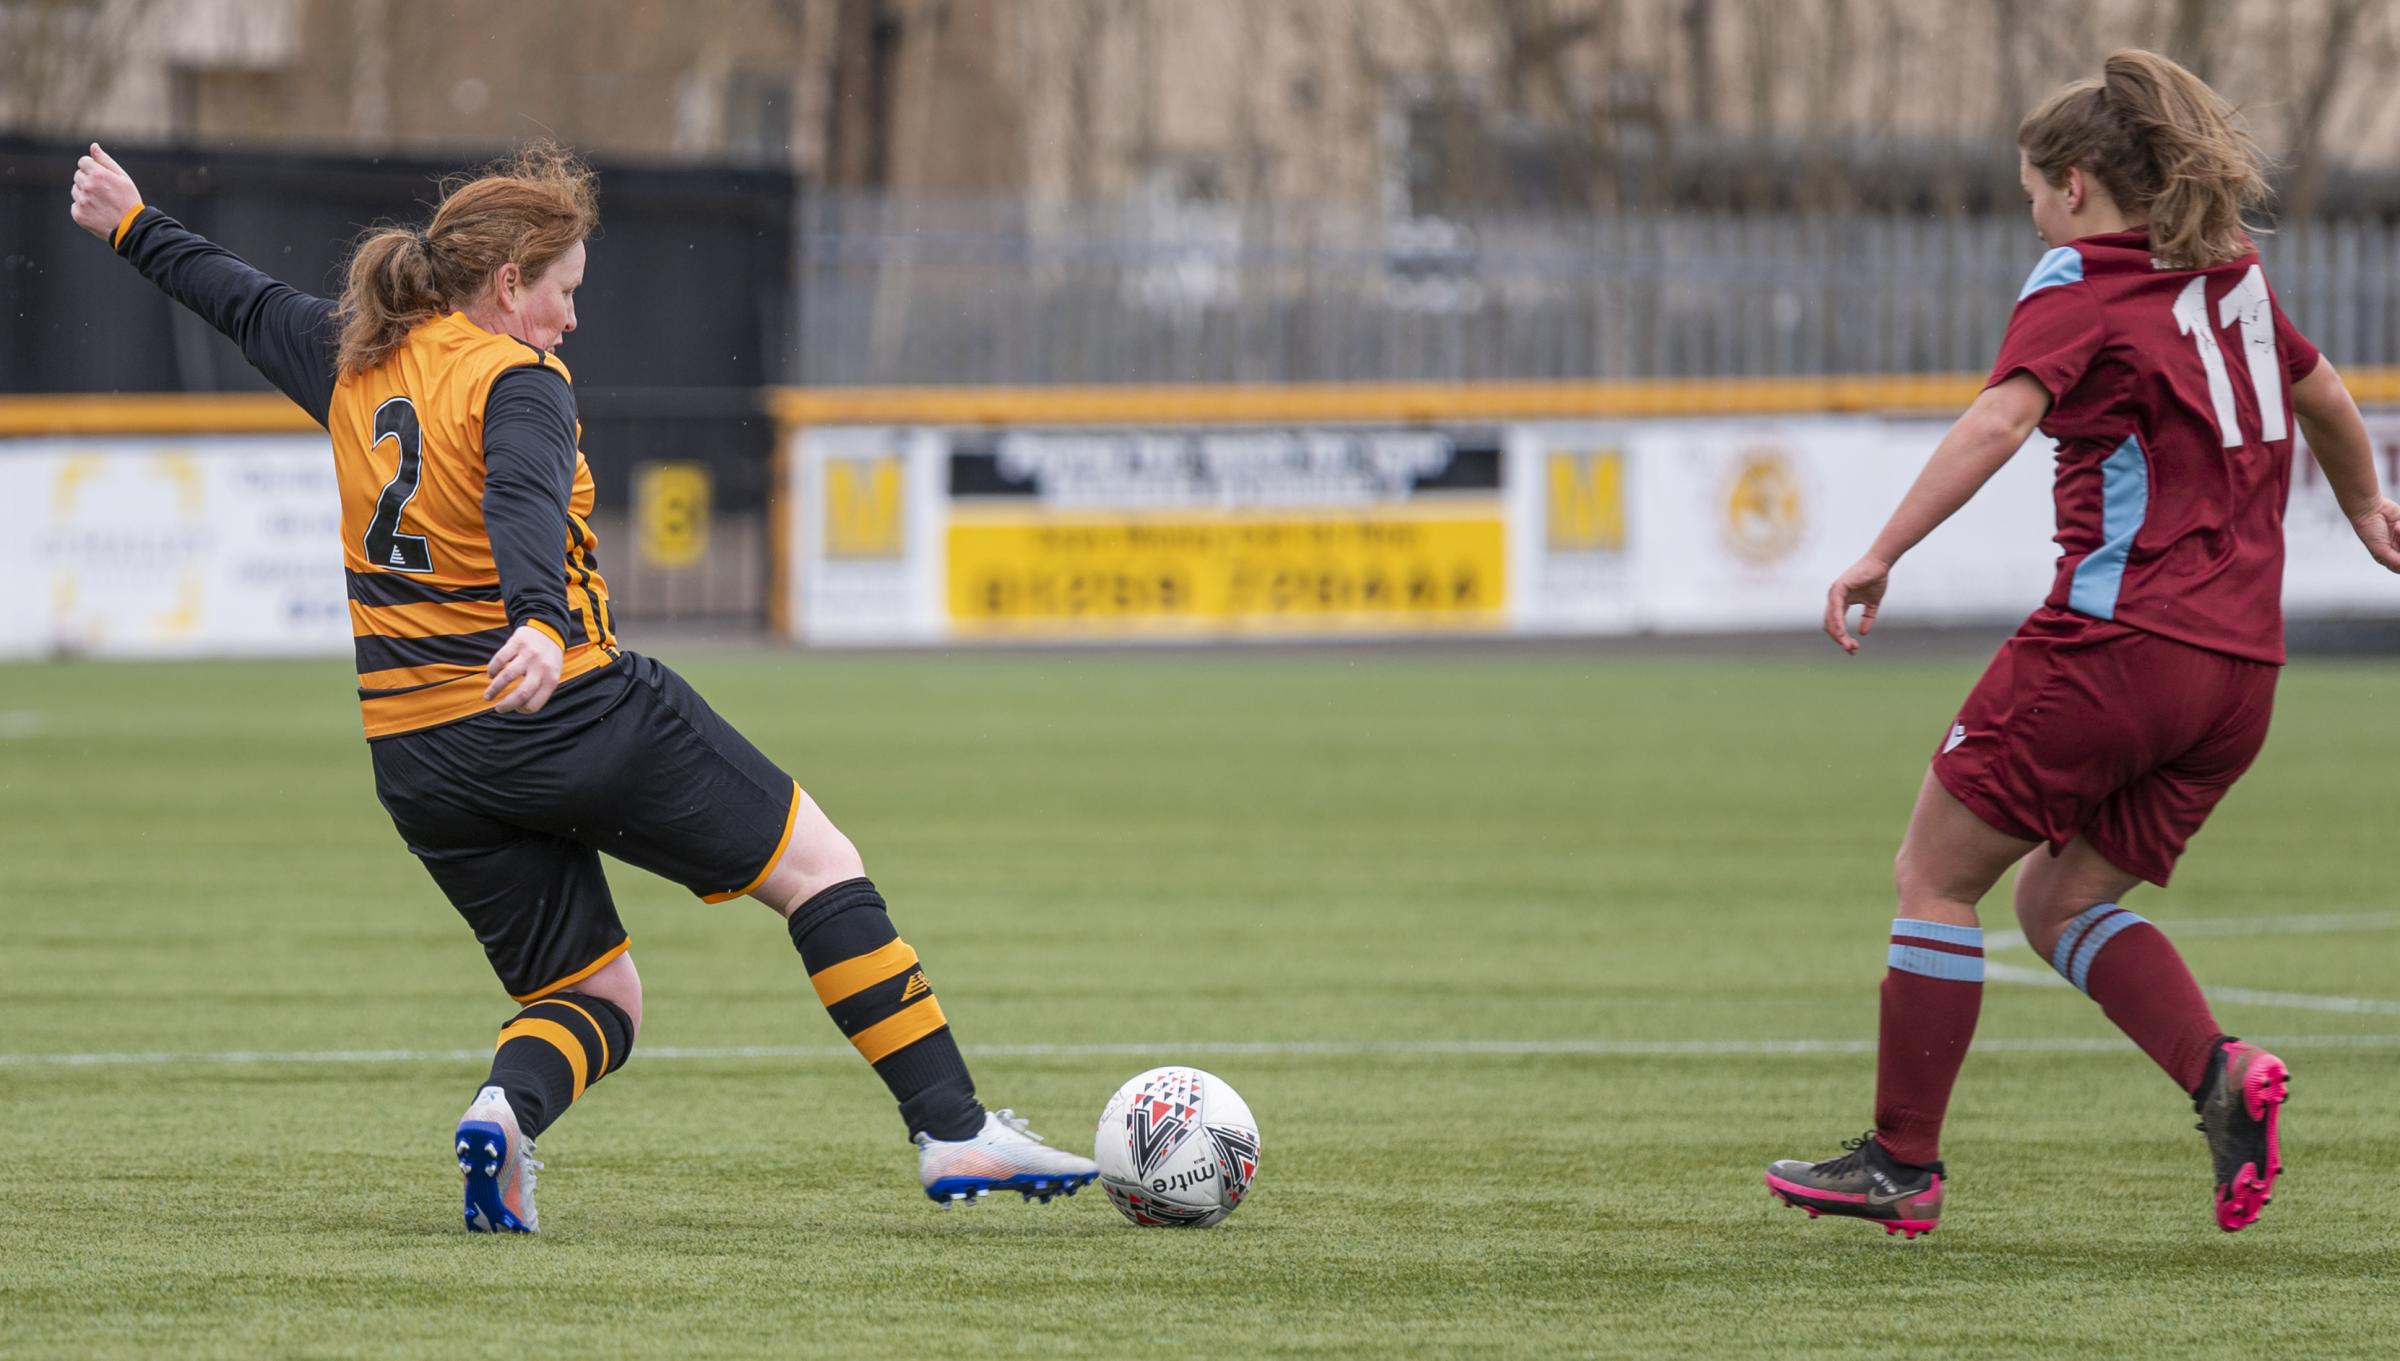 Lifelong Alloa Athletic fan Nicola McGuigan buzzing to be playing for the team